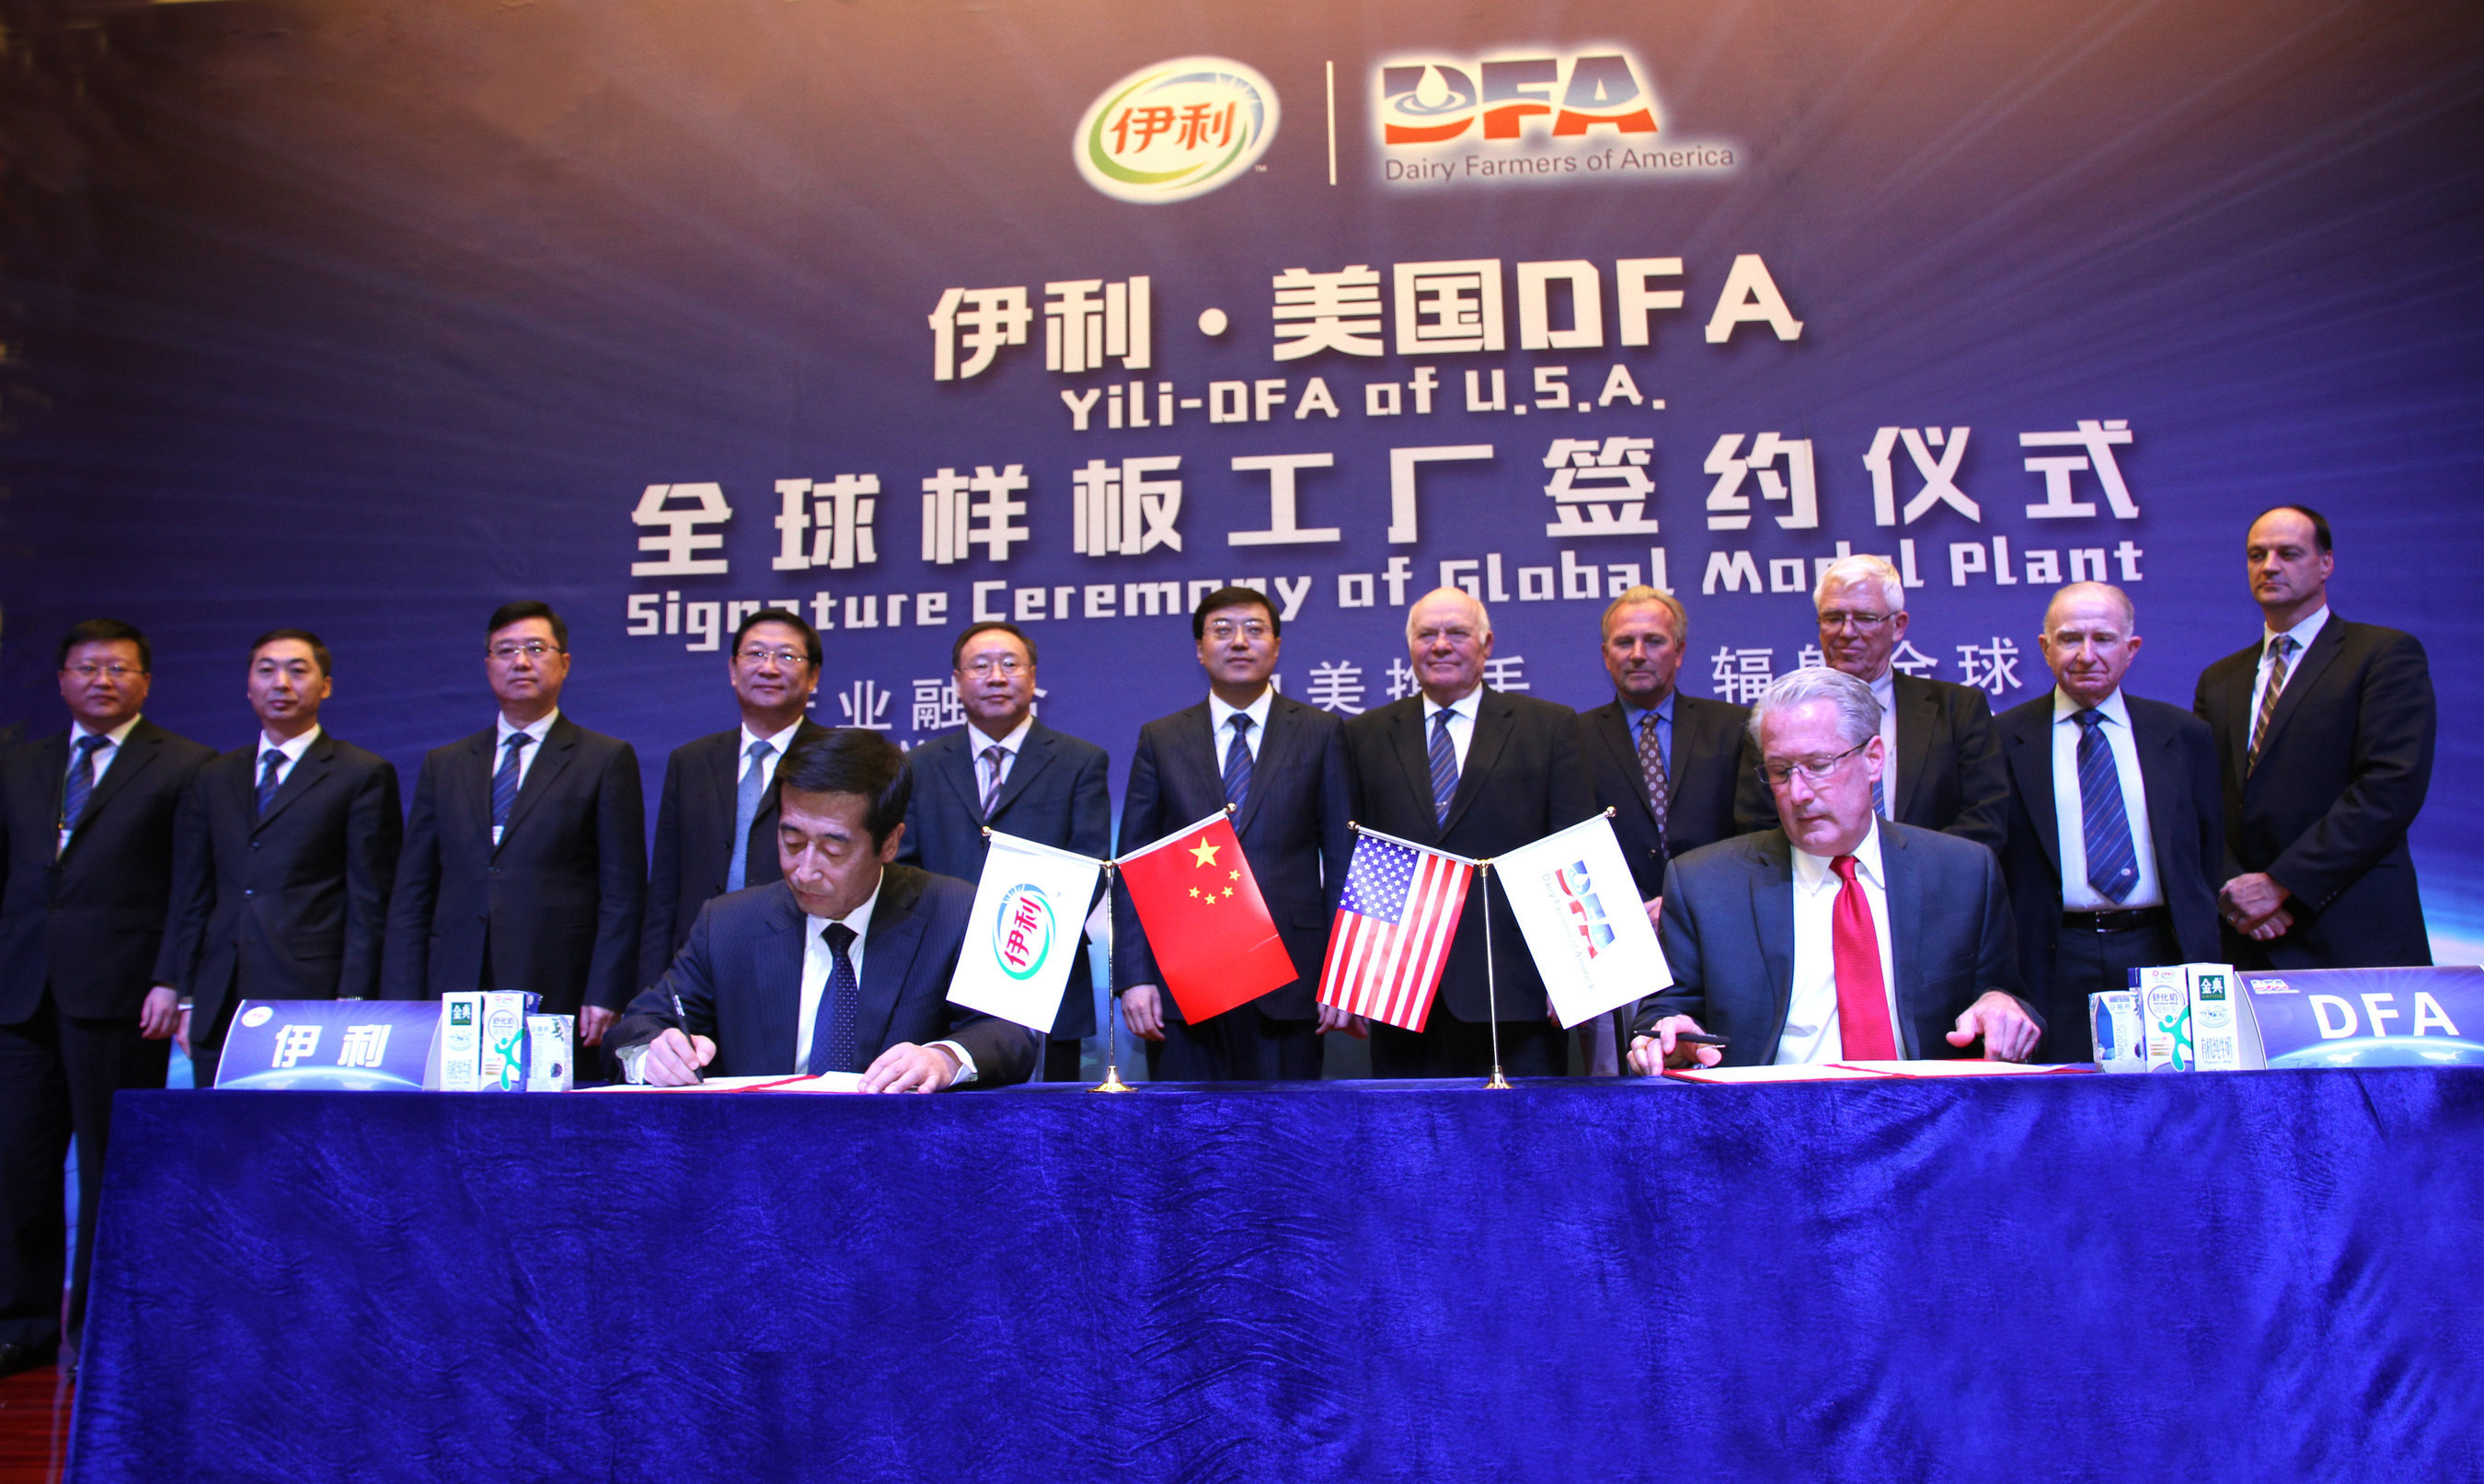 On November 12, Mr. Pan Gang - president of Yili Group, and Rick Smith - CEO of DFA, the largest dairy company in the U.S.A. and 20 participants witnessed the signature of a global model plant of Yili and DFA as well as the largest milk power plant in the U.S.A., which left an indelible mark on phylogeny in the dairy industries of China and U.S.A.